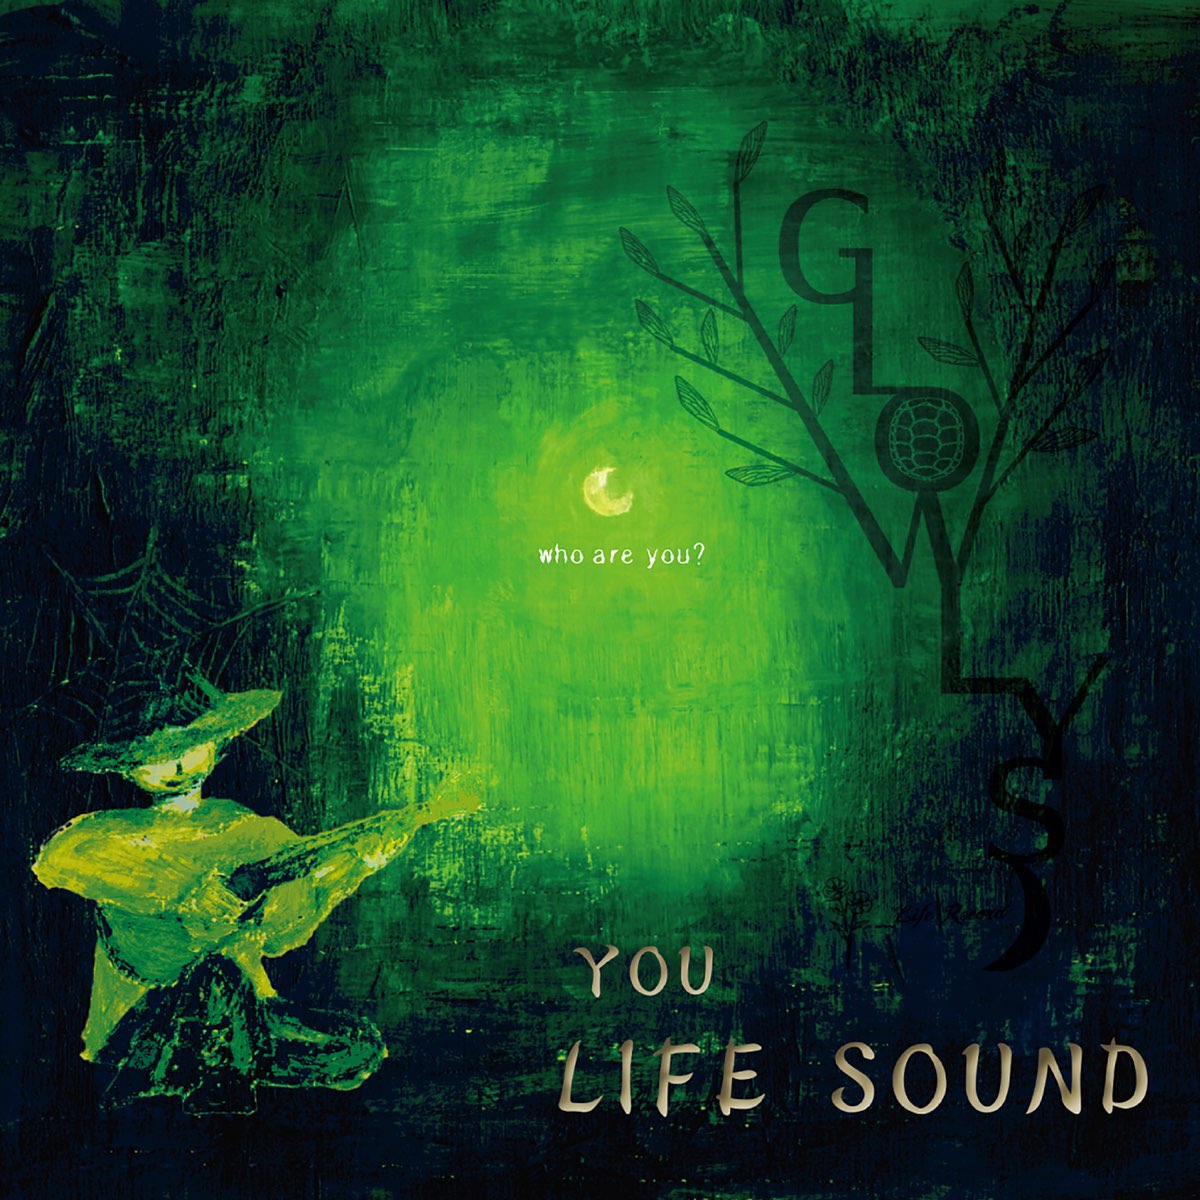 Life is sound. Glowly. Life by you.